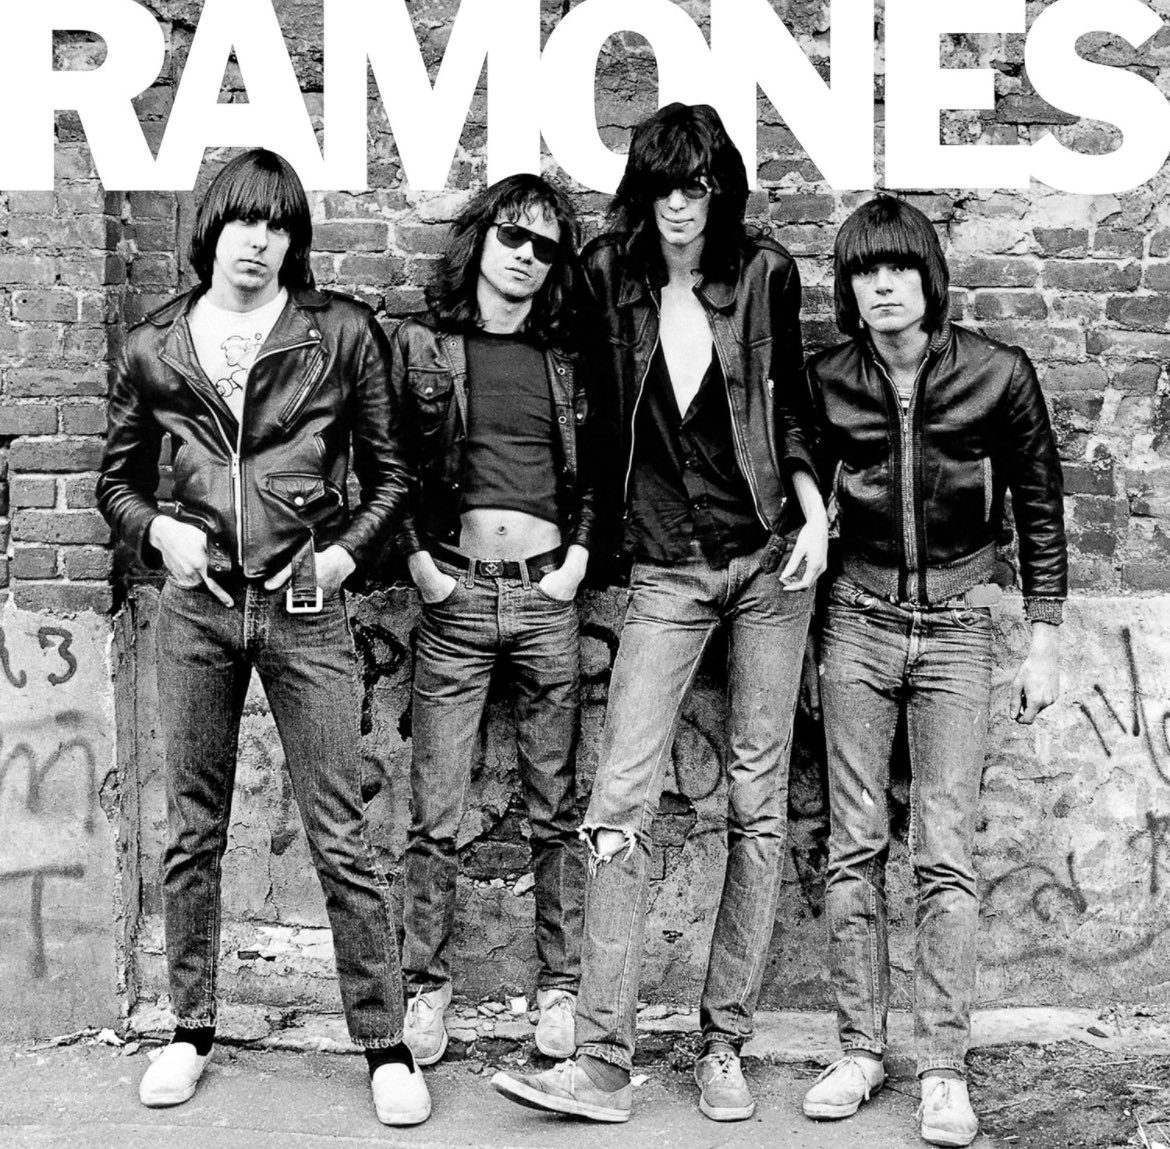 “I saw our first album for the first time at Alexander’s, probably the day it was released, April 23, 1976. There it was. It was cool, sort of like the first time I heard myself on the radio.” - Johnny Ramone, from his autobiography COMMANDO.⁣ What’s your favorite track from…